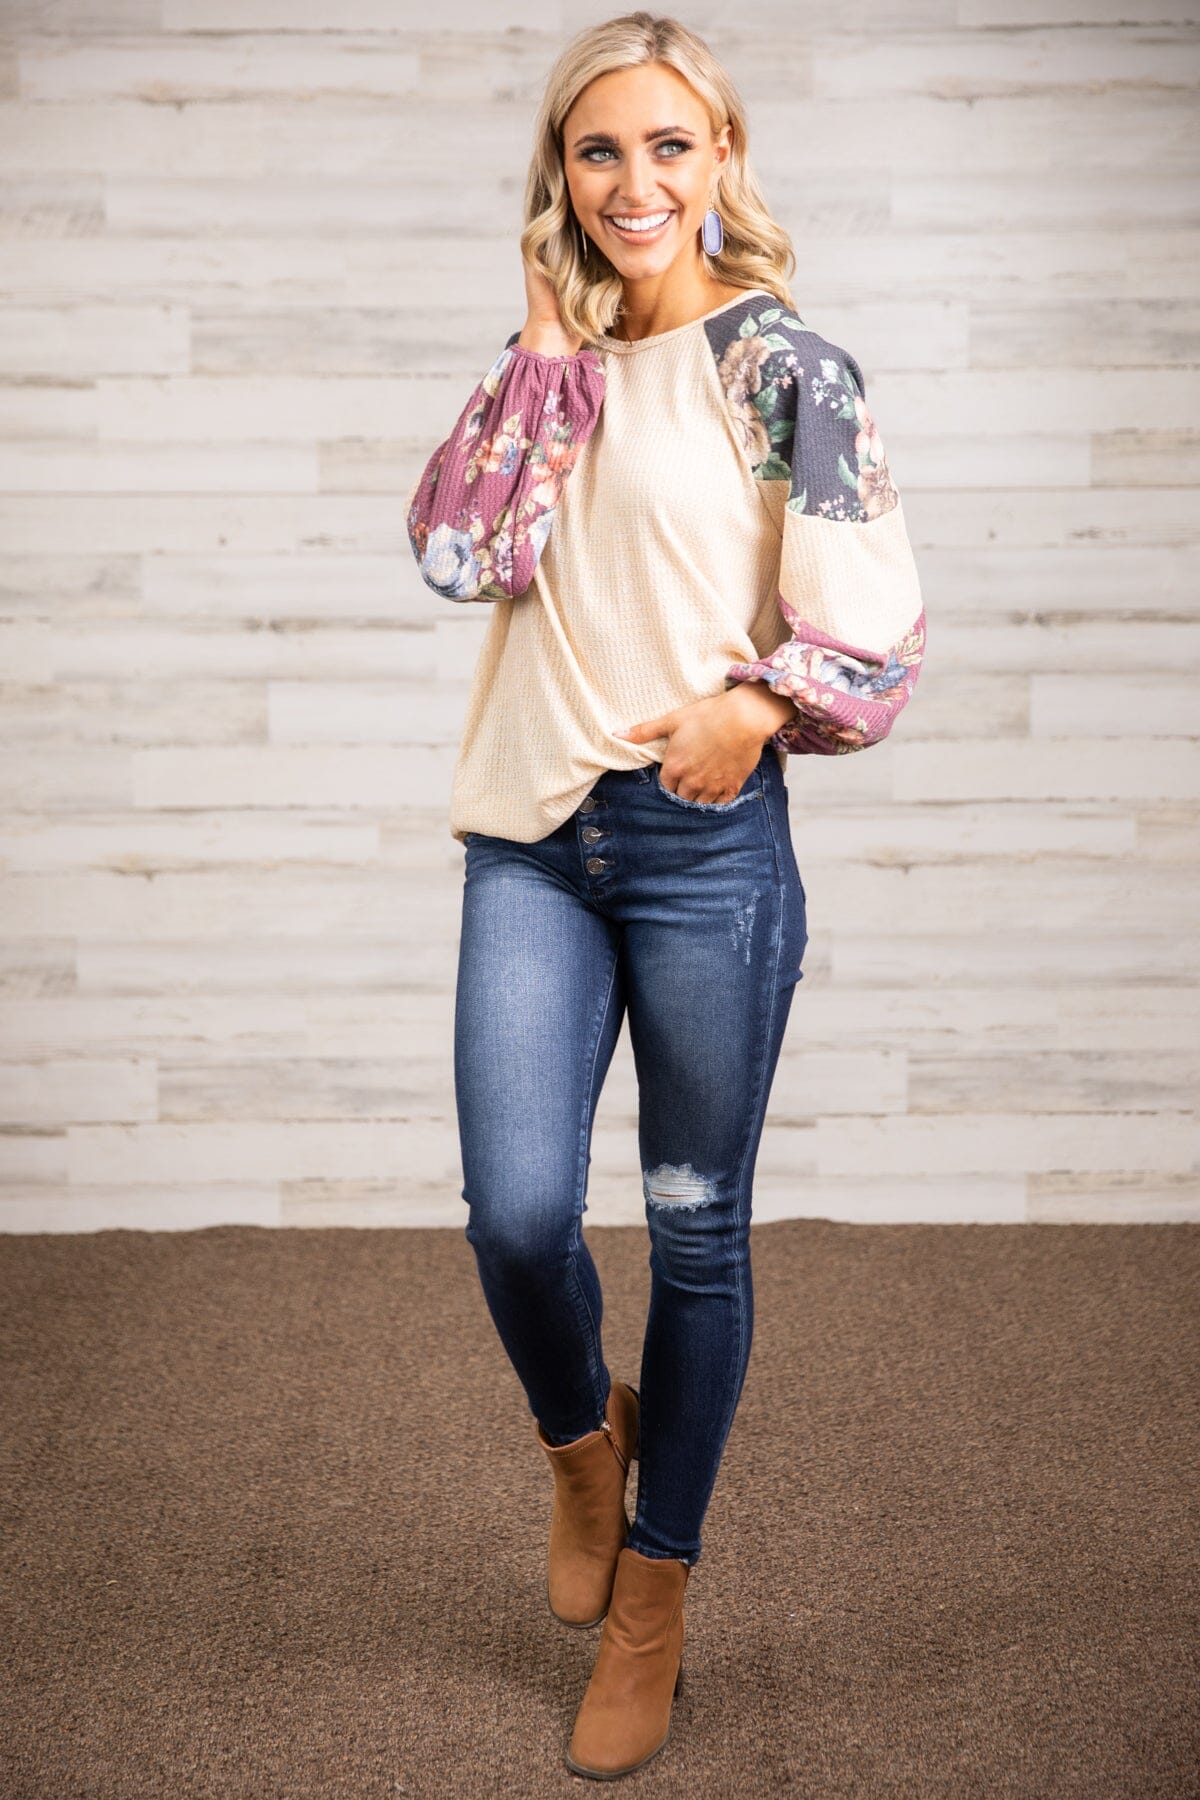 Beige and Berry Floral Print Sleeve Top - Filly Flair